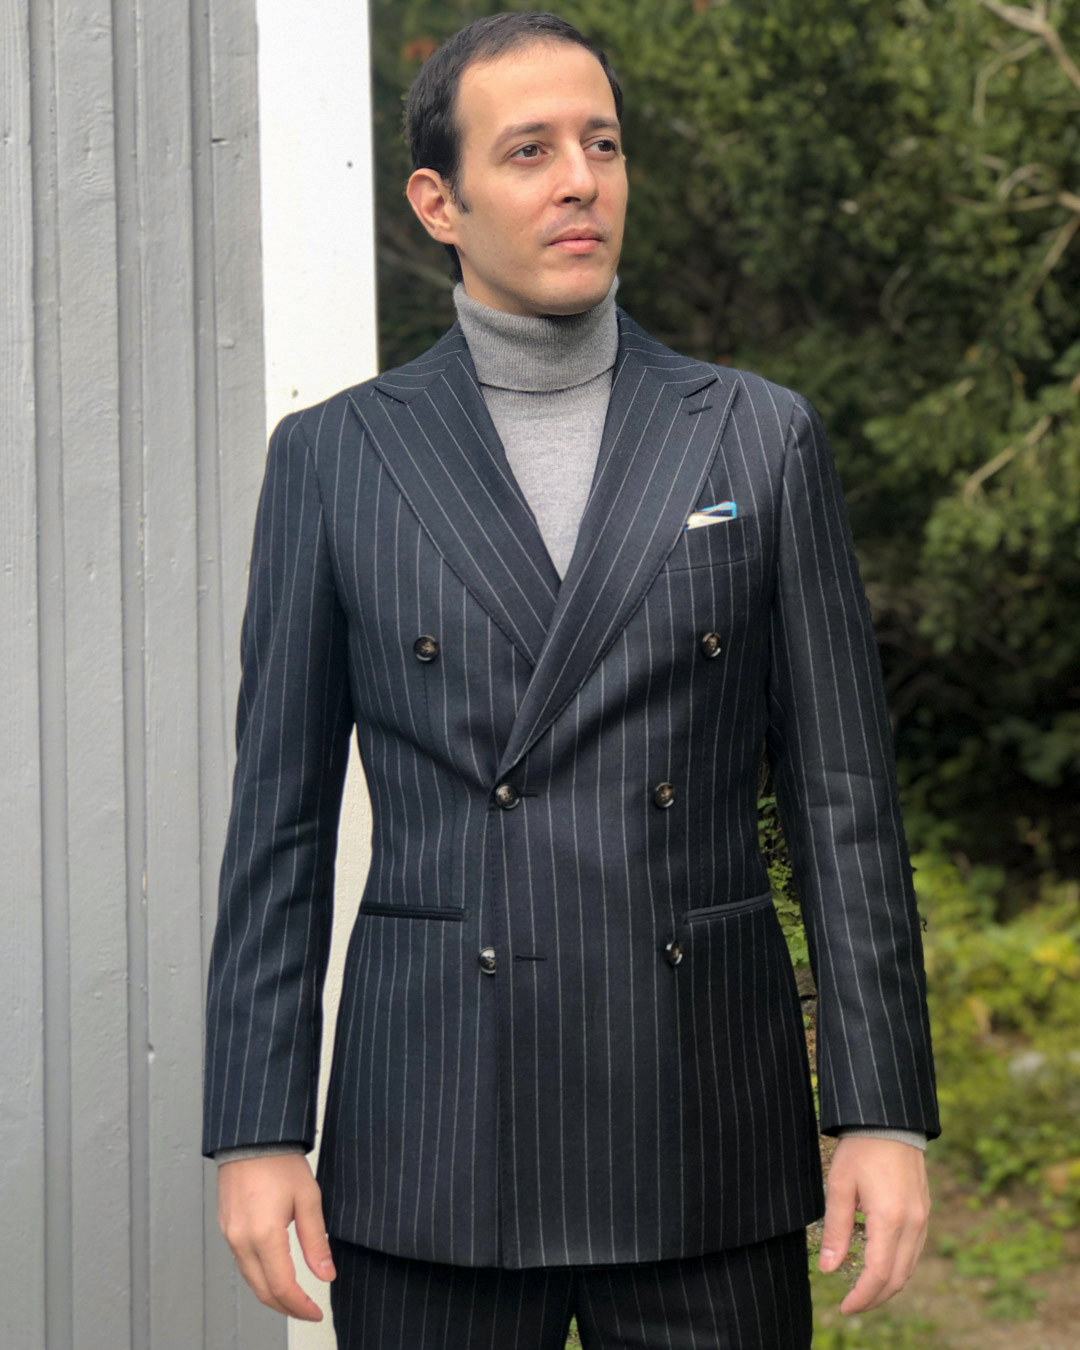 wearing charcoal grey double-breasted pinstripe suit with a turtleneck